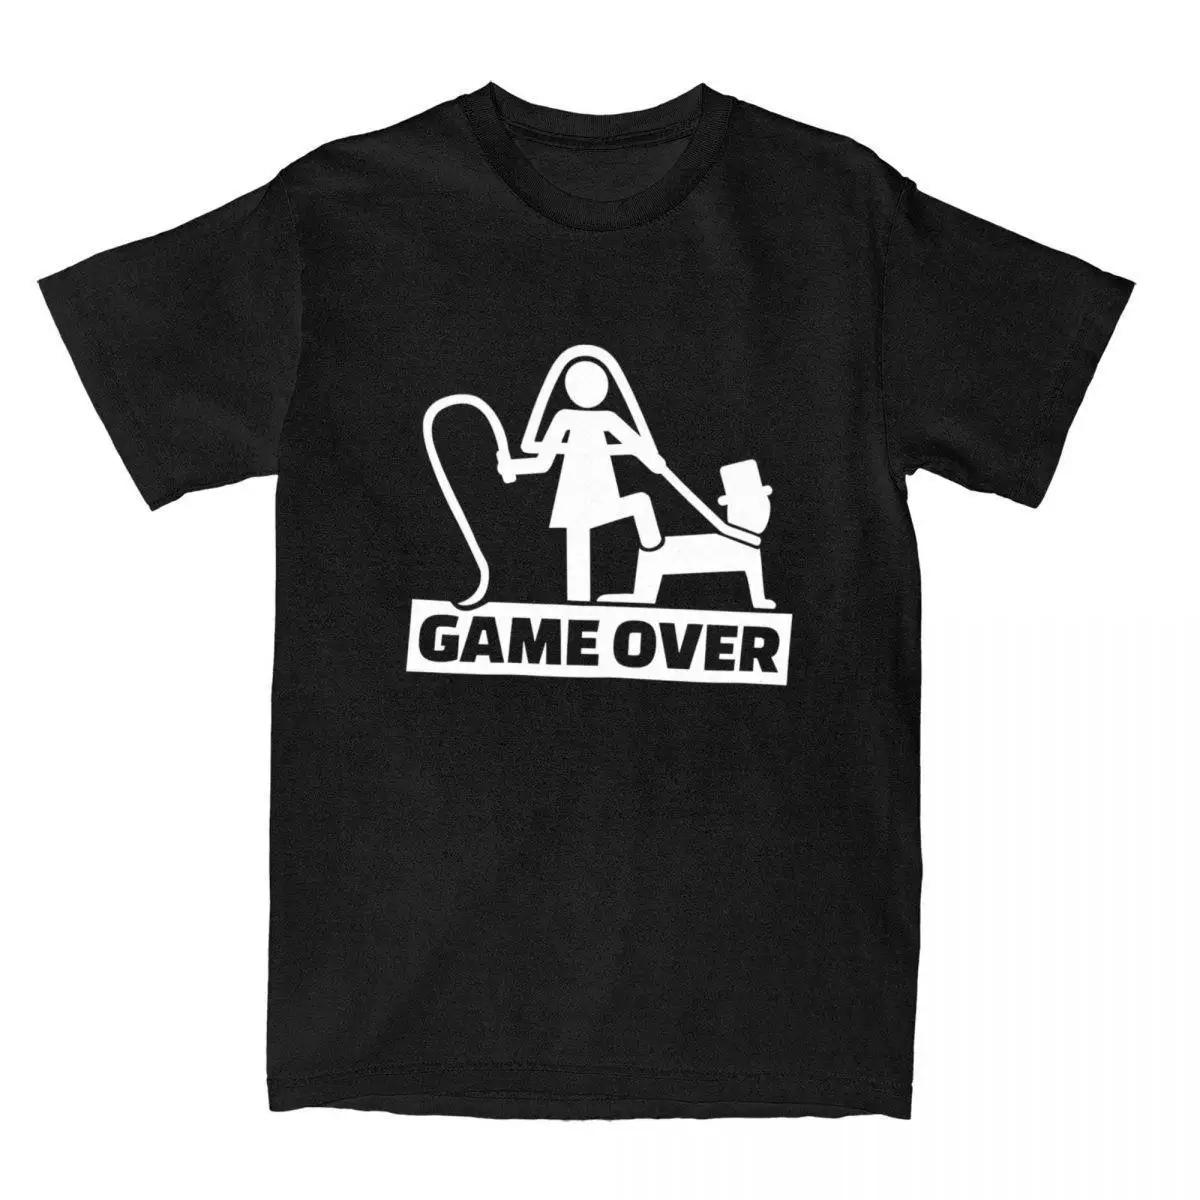 Game Over Slave Bridesmaid Party T Shirts for Men Pure Cotton Humorous T-Shirt Round Neck BDSM Tees Short Sleeve Tops Plus Size